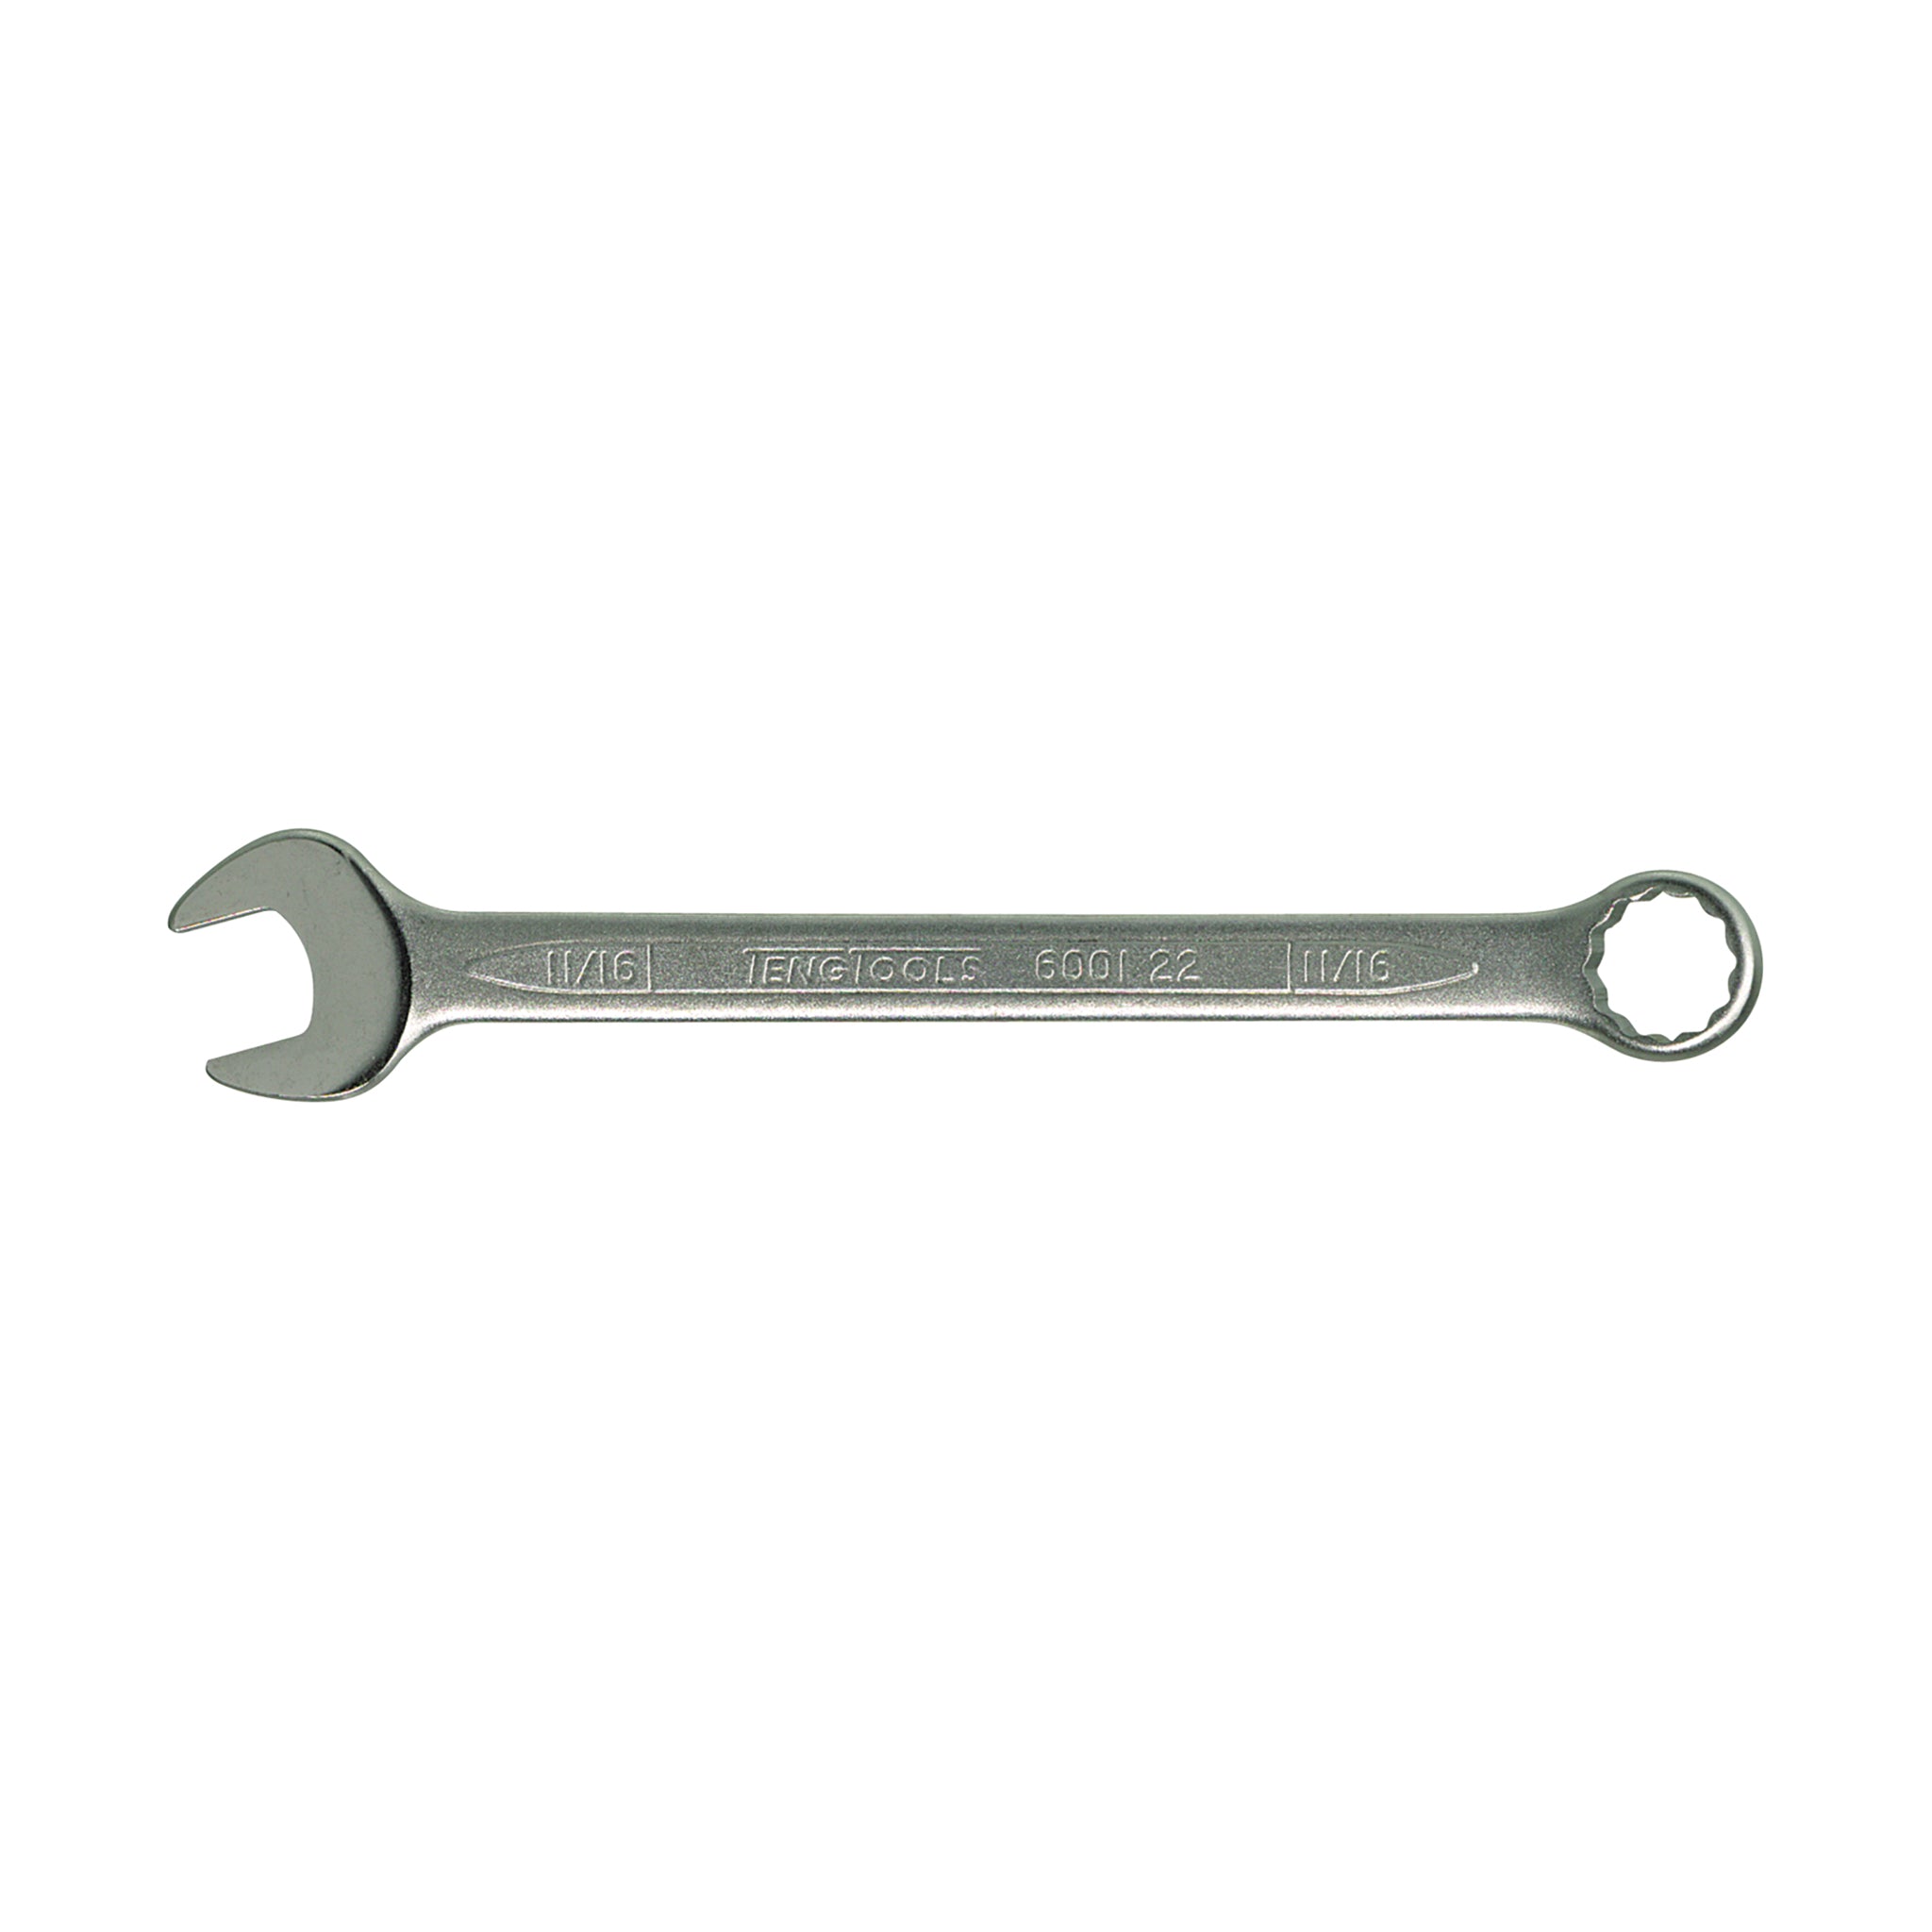 Standard Combination SAE Wrenches Made With Chrome Vanadium Steel - 7/16